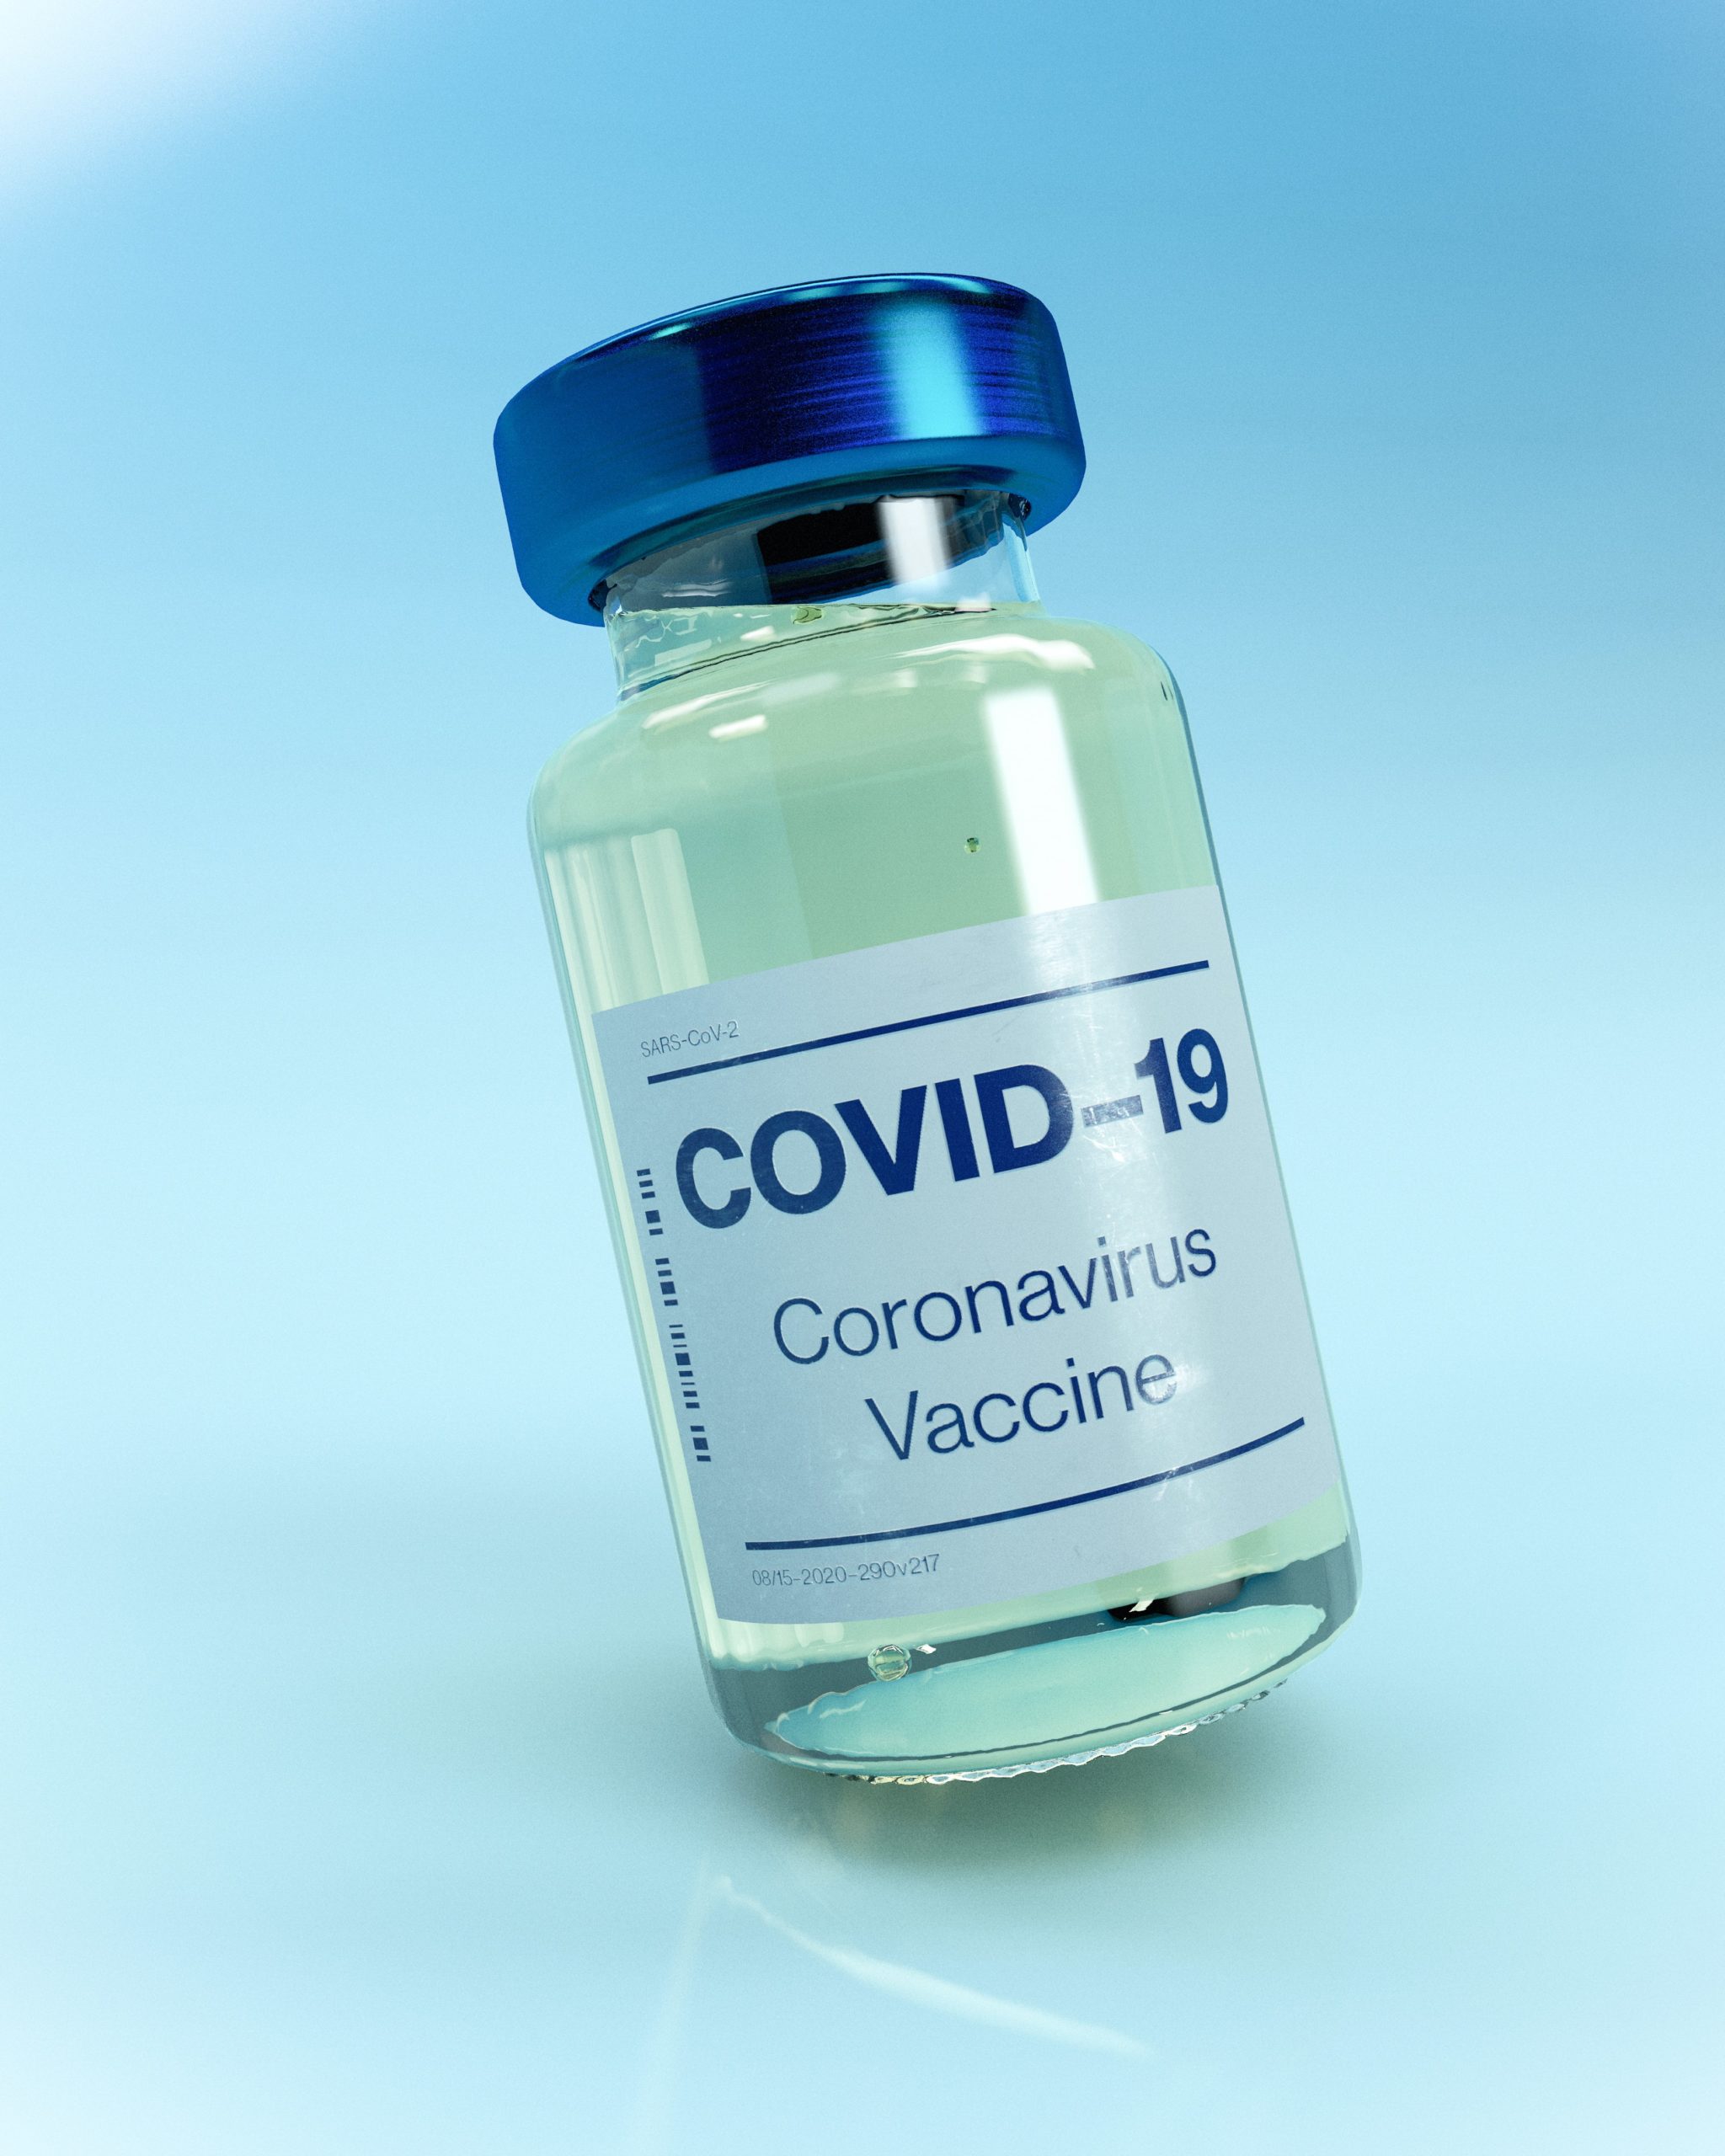 Less than a year to develop a COVID vaccine – here’s why you shouldn’t be alarmed